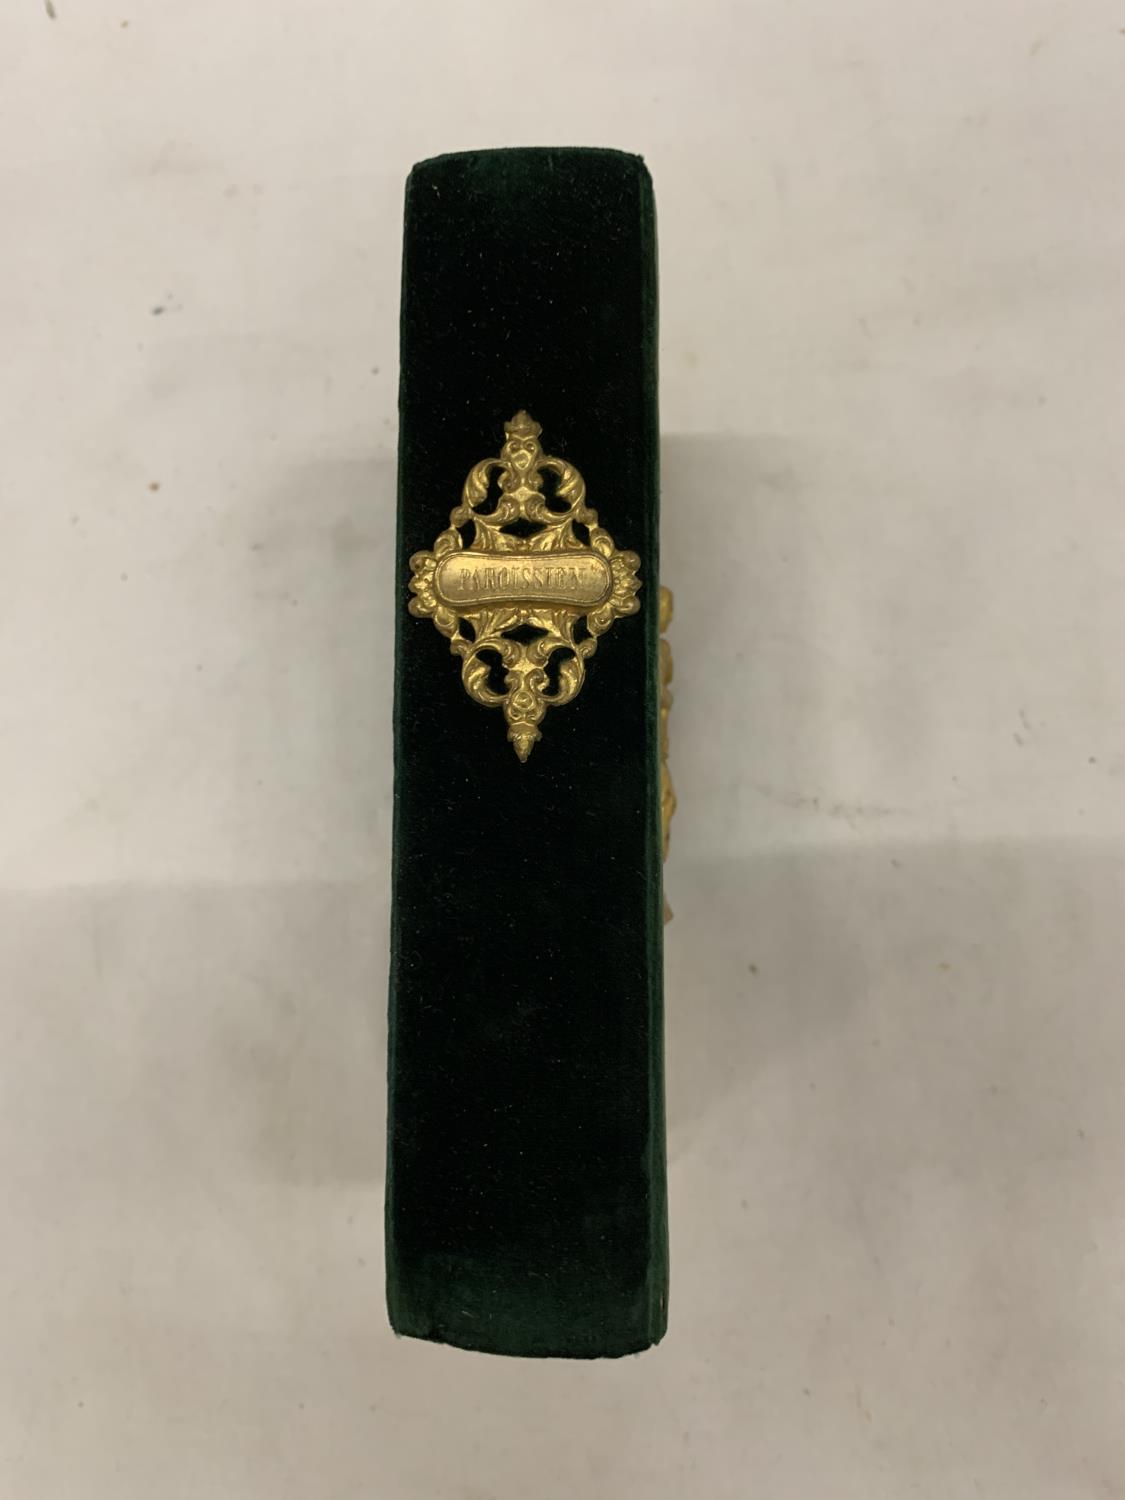 A FRENCH PRAYER BOOK IN CUSHION FELT, WITH GOLD LEAF PAGES AND GILT METAL FRET WORK - Image 4 of 5